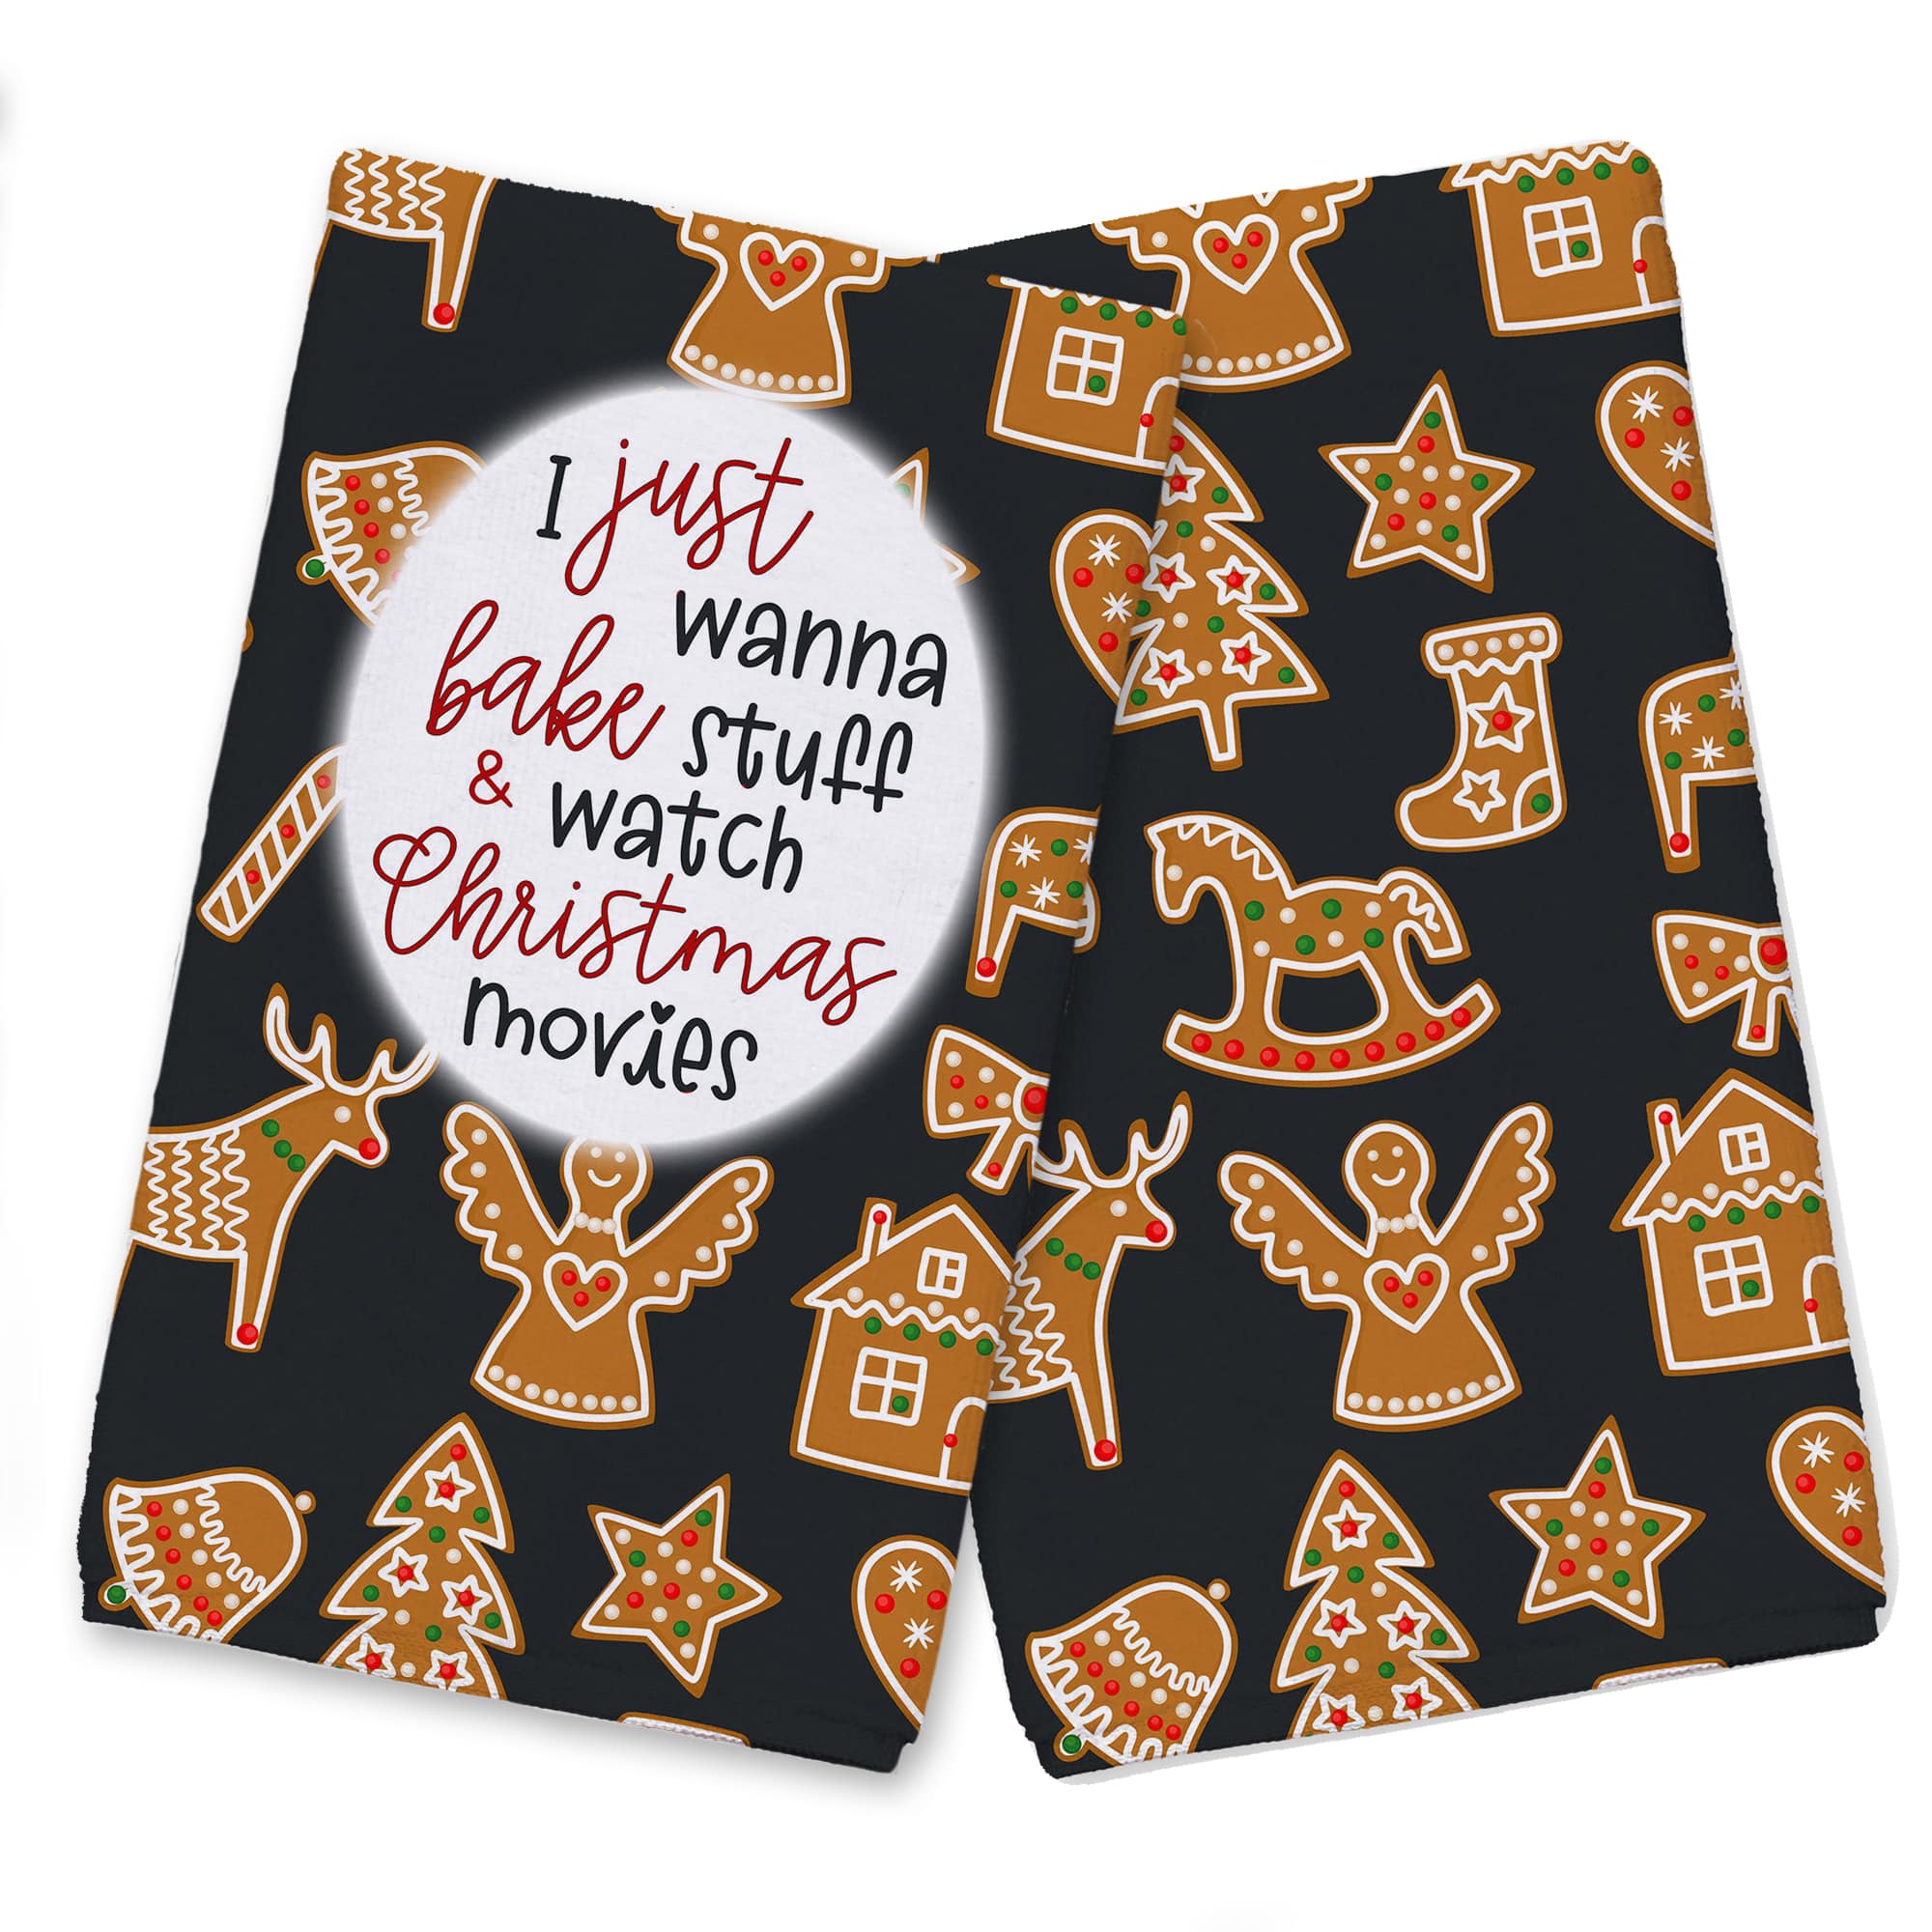 Xmas Movies And Baking Cookie Tea Towels - Set of 2